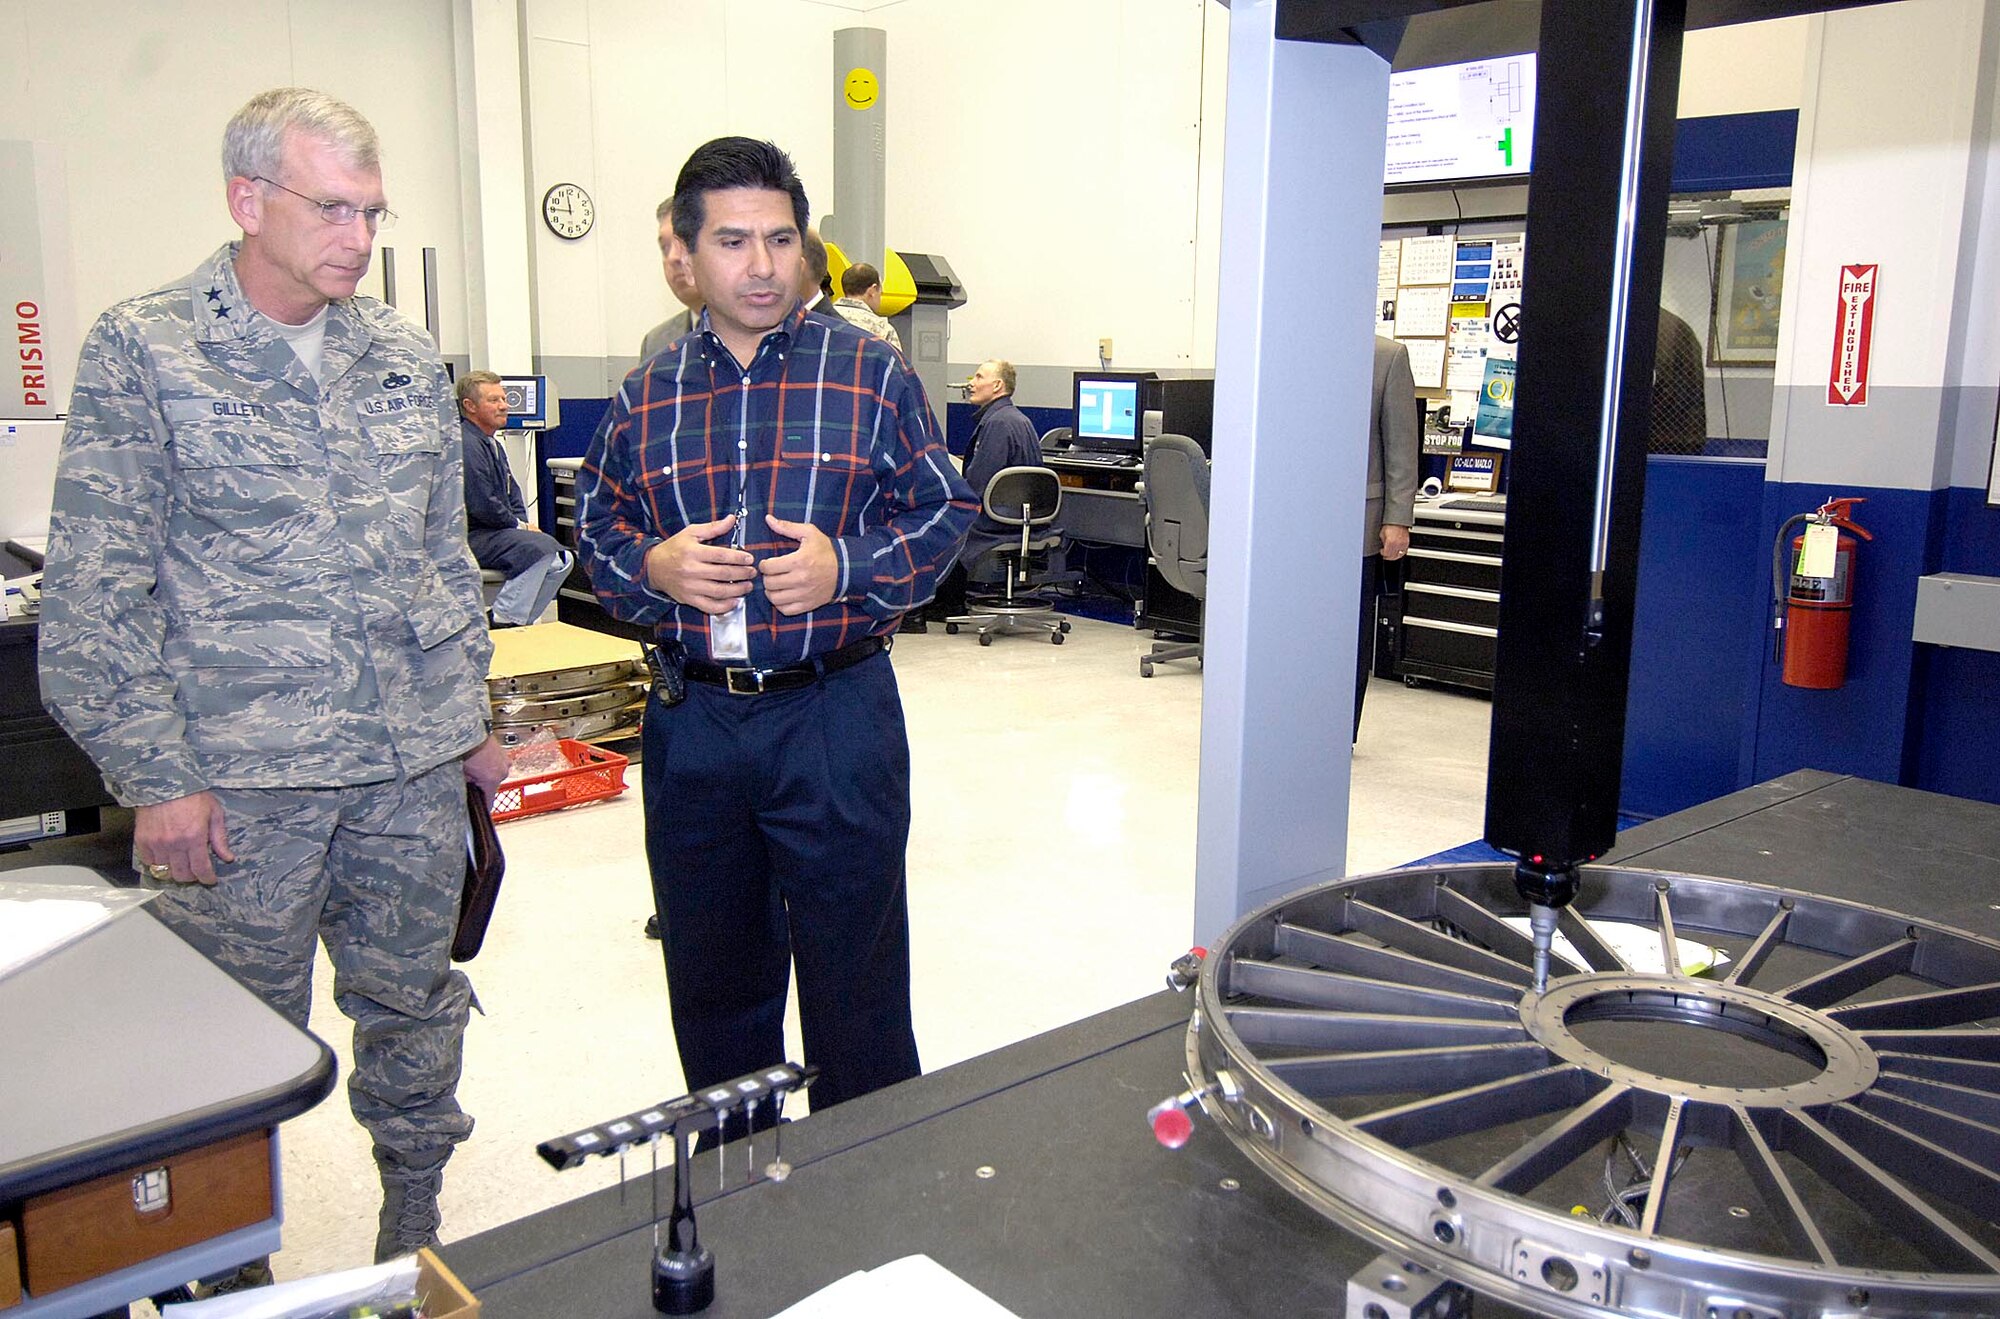 Maj. Gen. P. David Gillett Jr. tours areas of the 76th Maintenance Wing Jan. 14, during his orientation to Tinker, days after assuming command of the Oklahoma City Air Logistics Center. Ron Camacho, chief of the quality verification center, describes the use of a Coordinate Measuring Machine on an F100 engine inlet fan case in the Metrology Laboratory. As part of the orientations, General Gillett was also briefed at the 327th Aircraft Sustainment Wing on Jan. 16. (Air Force photo/Margo Wright)